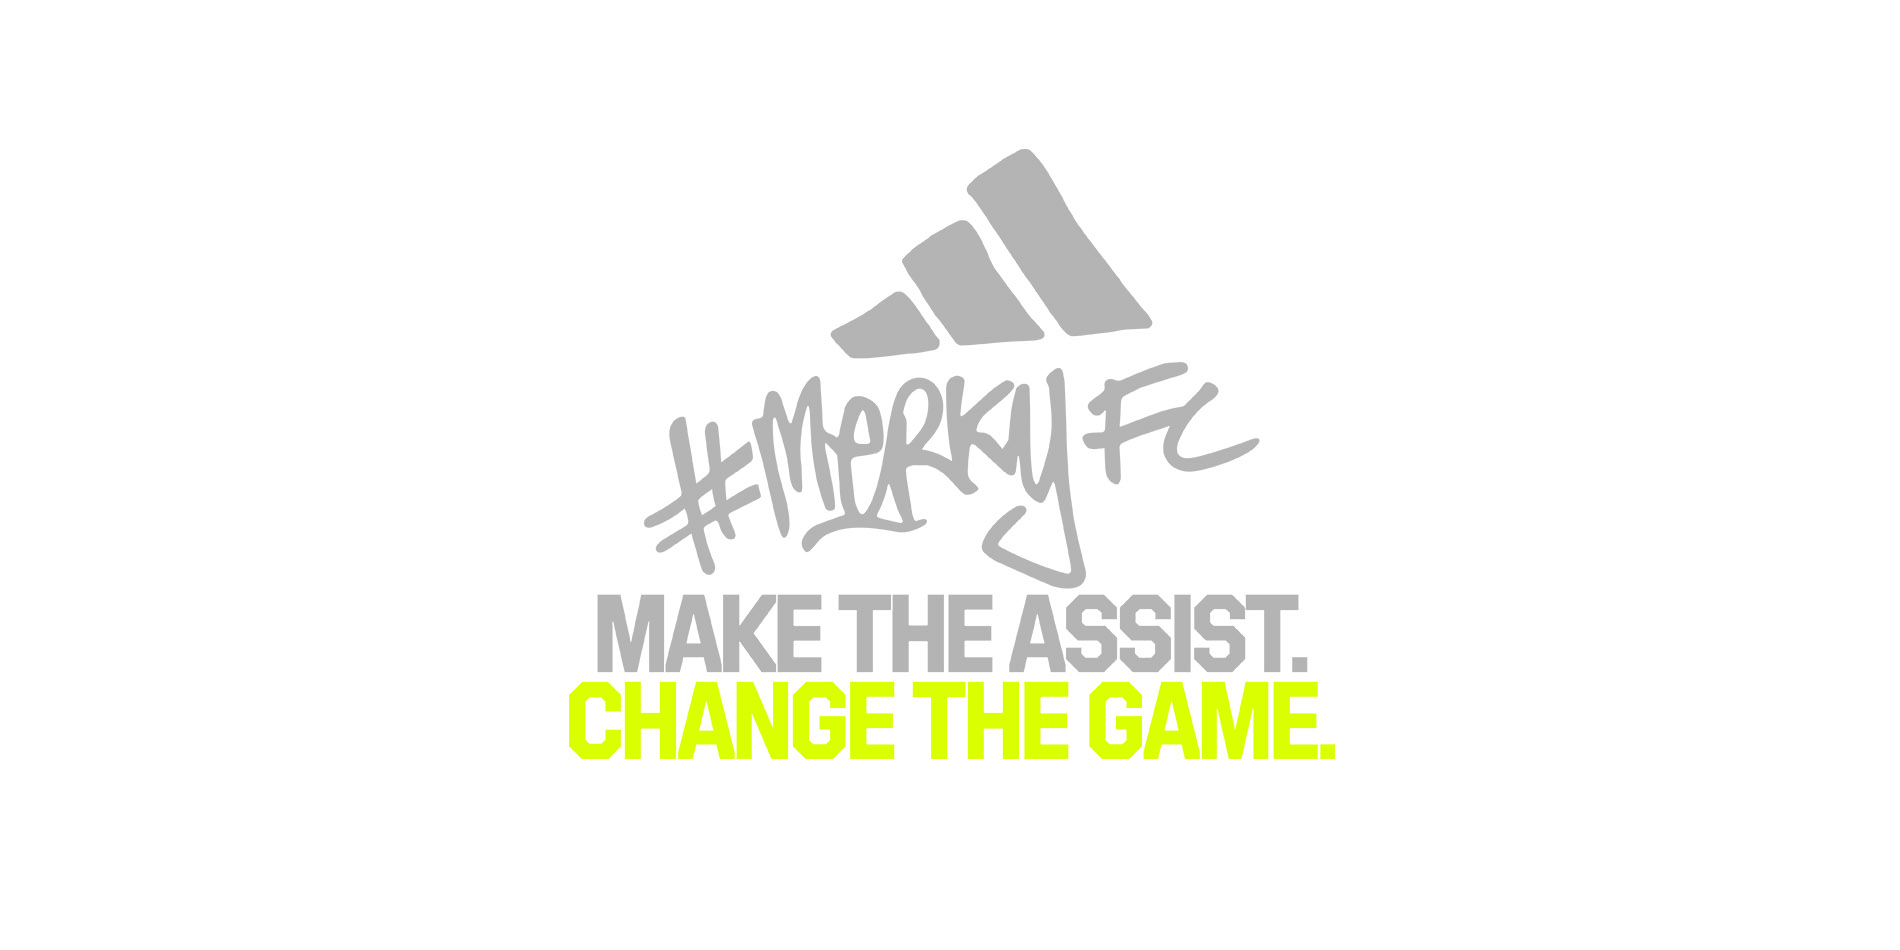 Sports Interactive partners with Stormzy and Adidas initiative #Merky FC